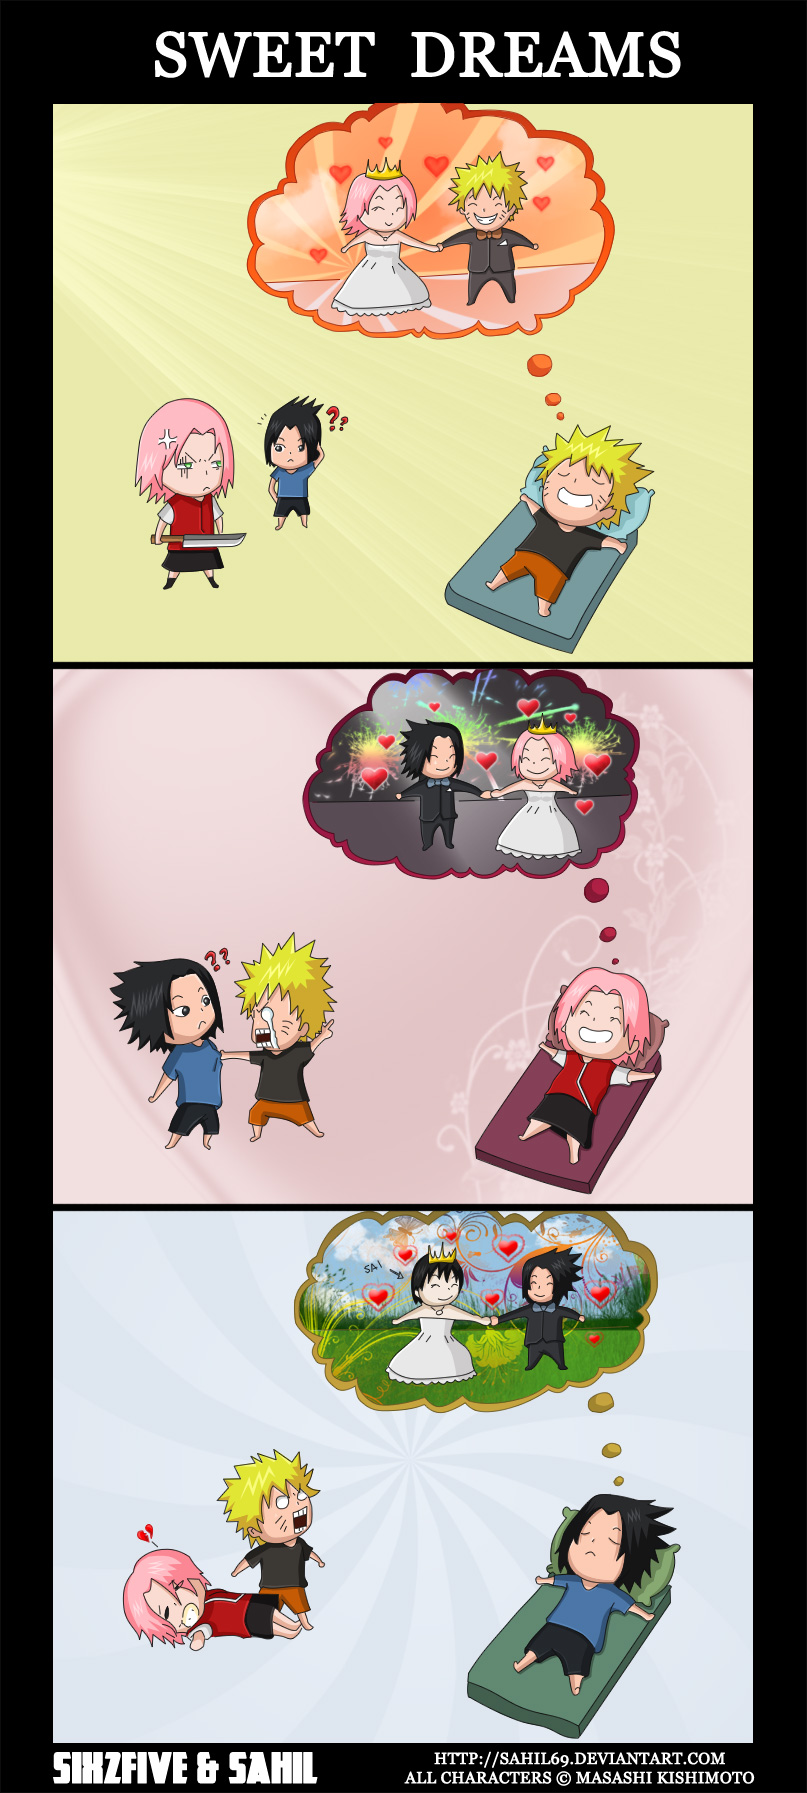 Naruto Shippuden - Team 7 Cosplay Time by Flasho-D on DeviantArt